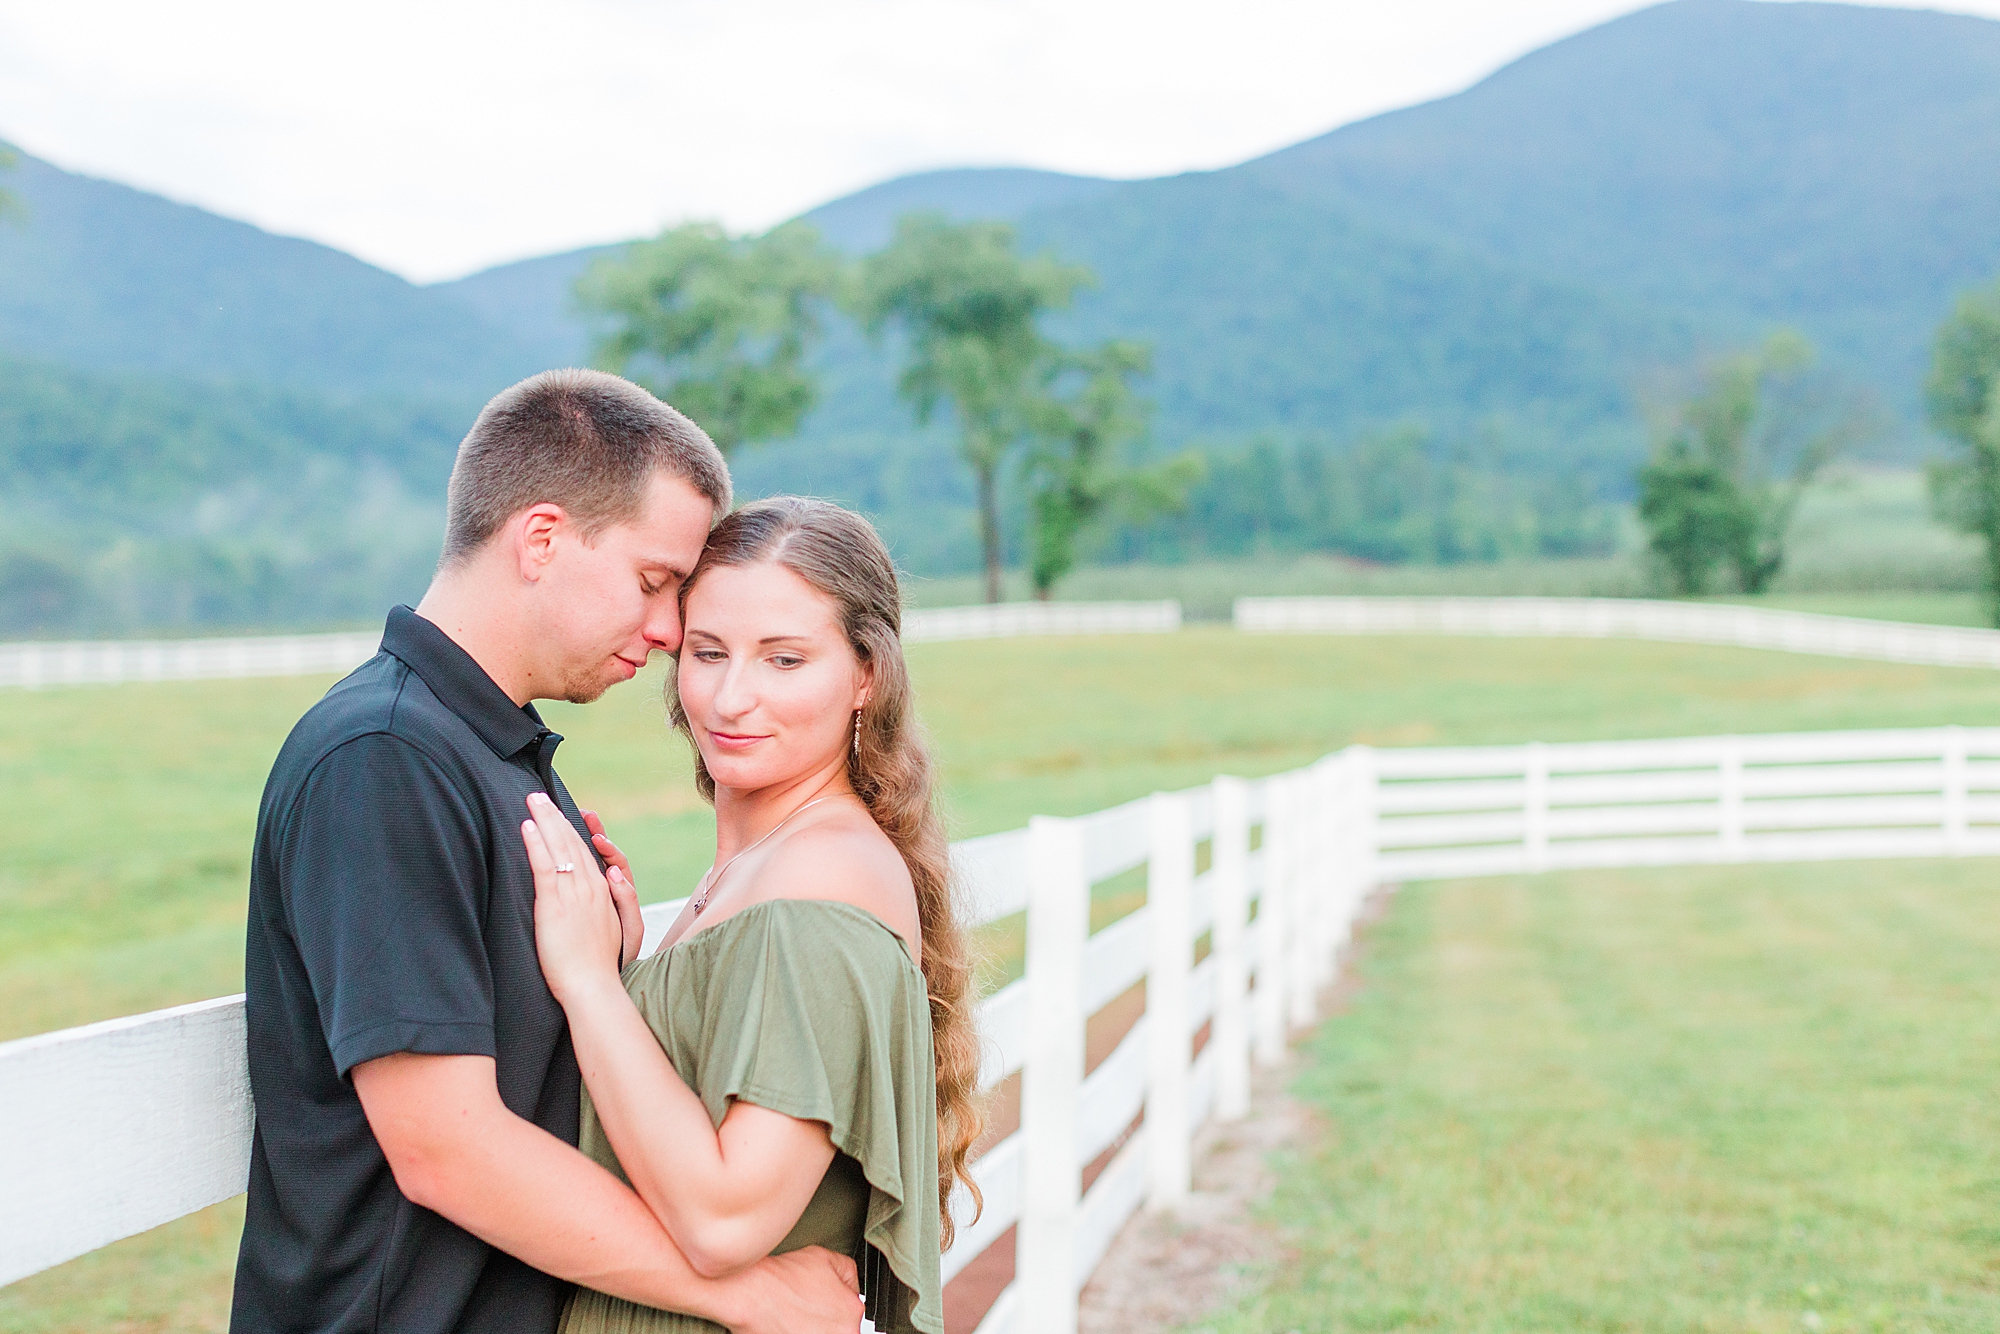 Beautiful location for Virginia engagement photos. Couple is holding hands walking towards camera.